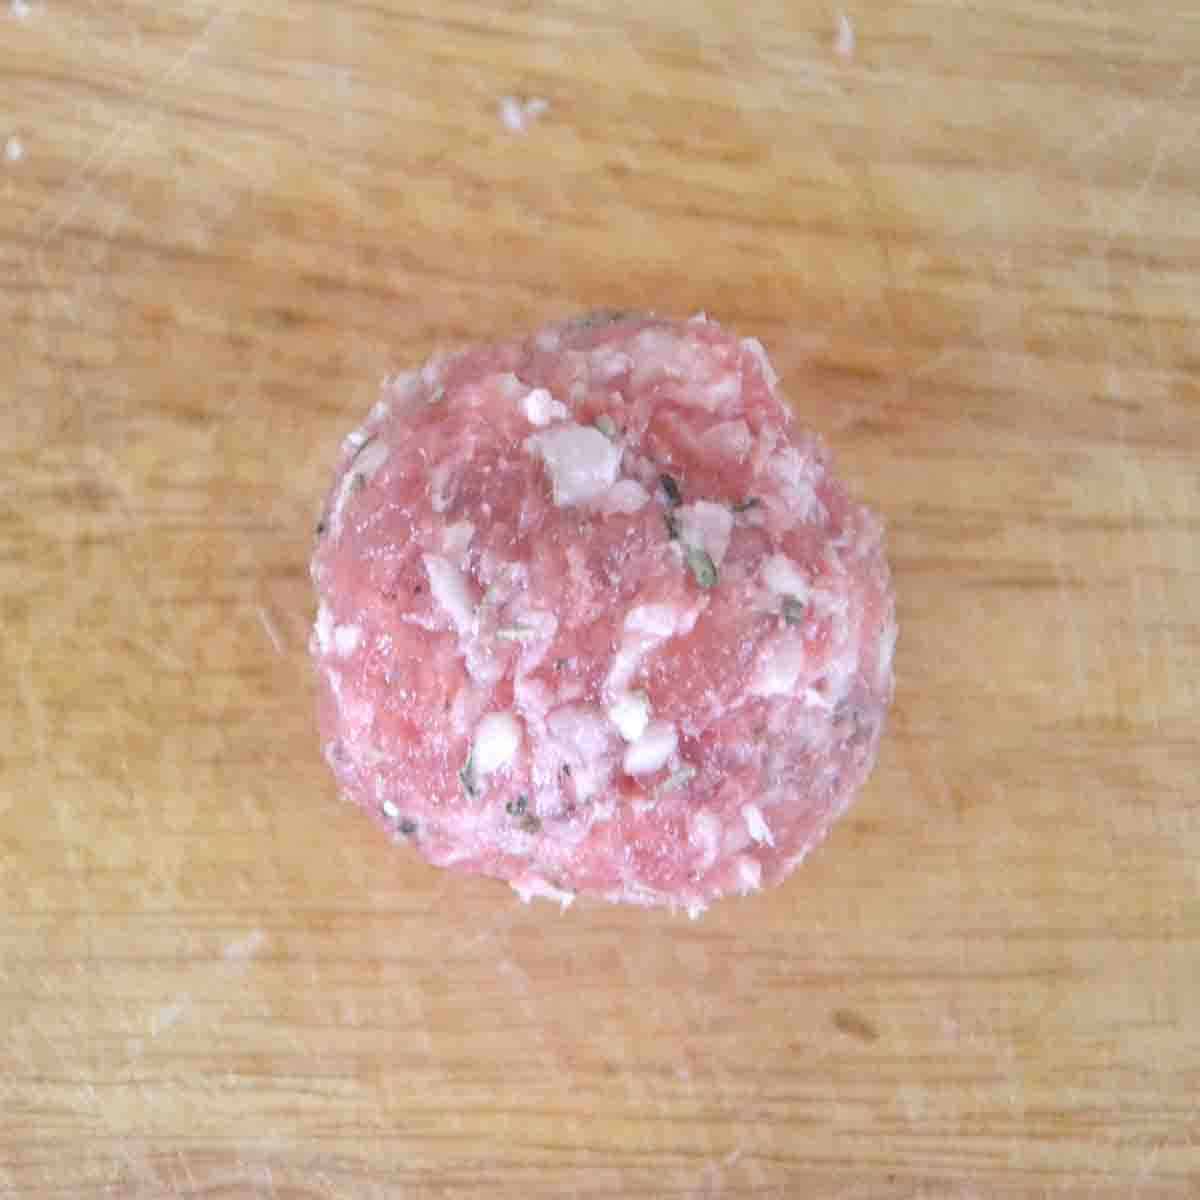 ball of sausage meat with egg inside.